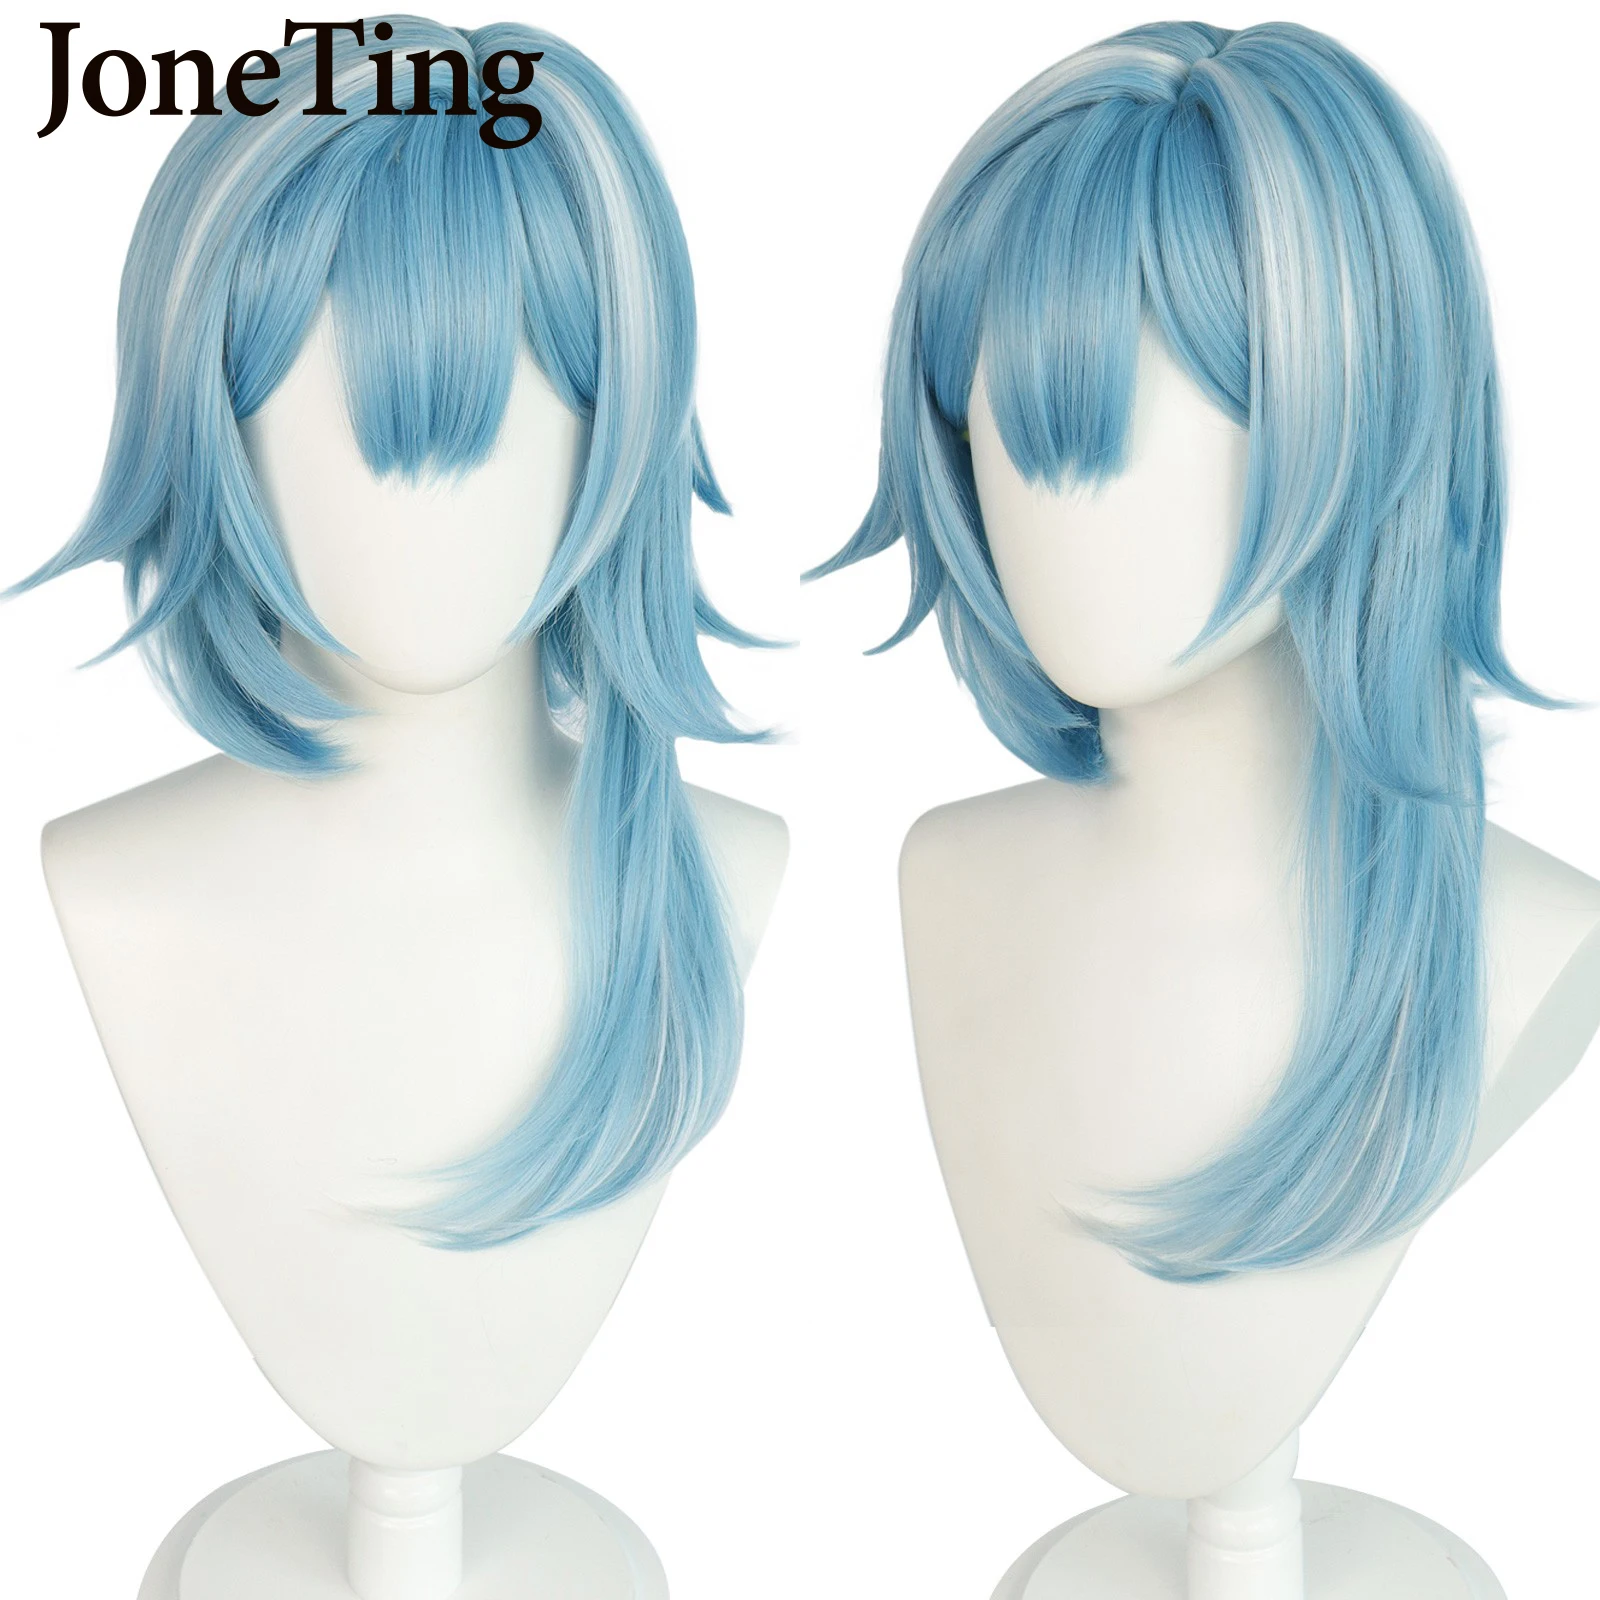 JT Synthetic Eula Cosplay Wigs Game Genshin Impact Long Light Blue Wavy Hair with Bangs Heat Resistant Fiber Wig Machine Made